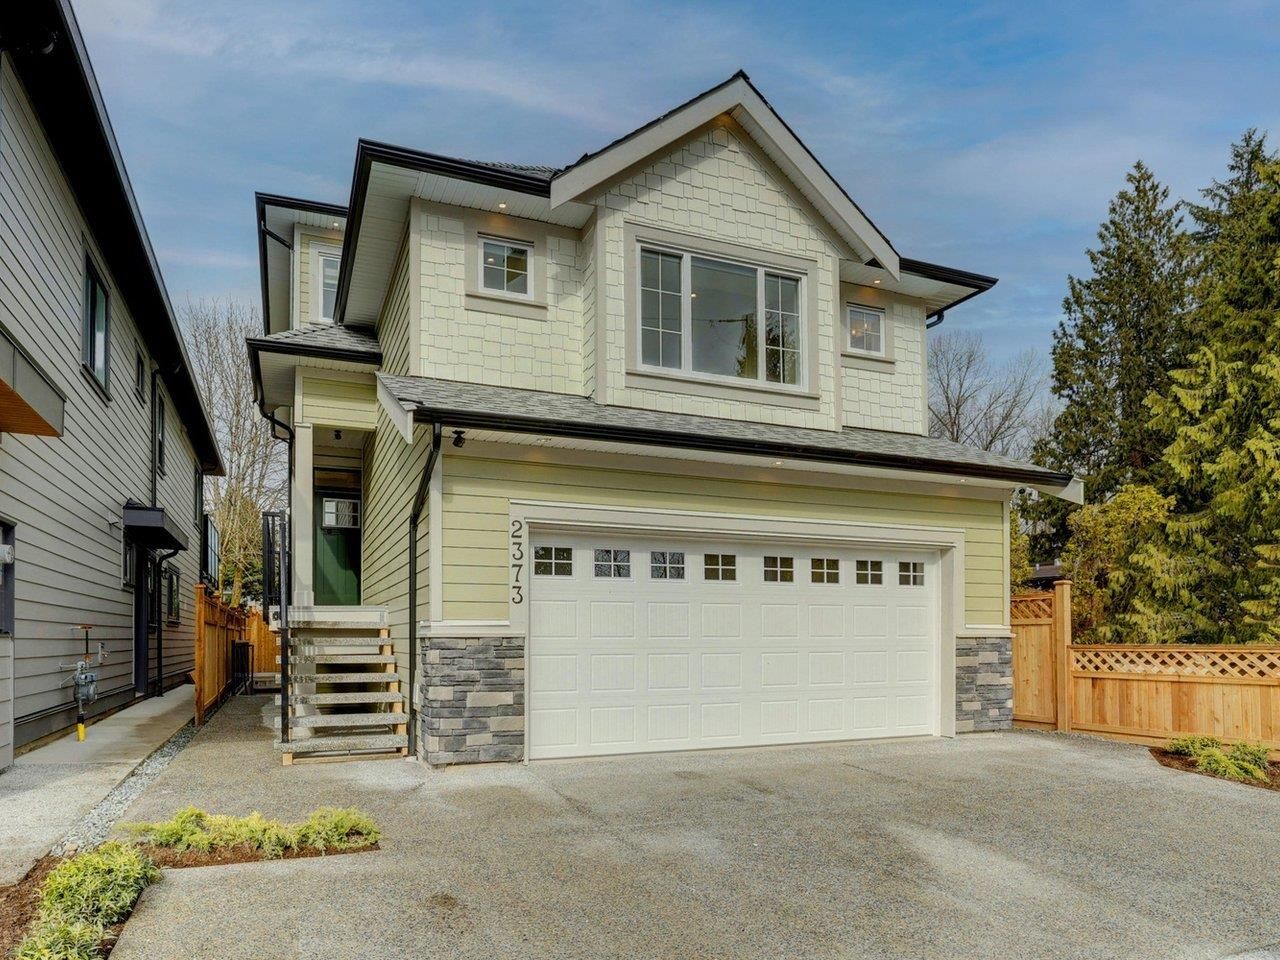 Main Photo: 2373 Kitchener in : Woodland Acres PQ House for sale (Port Coquitlam)  : MLS®# R2662167